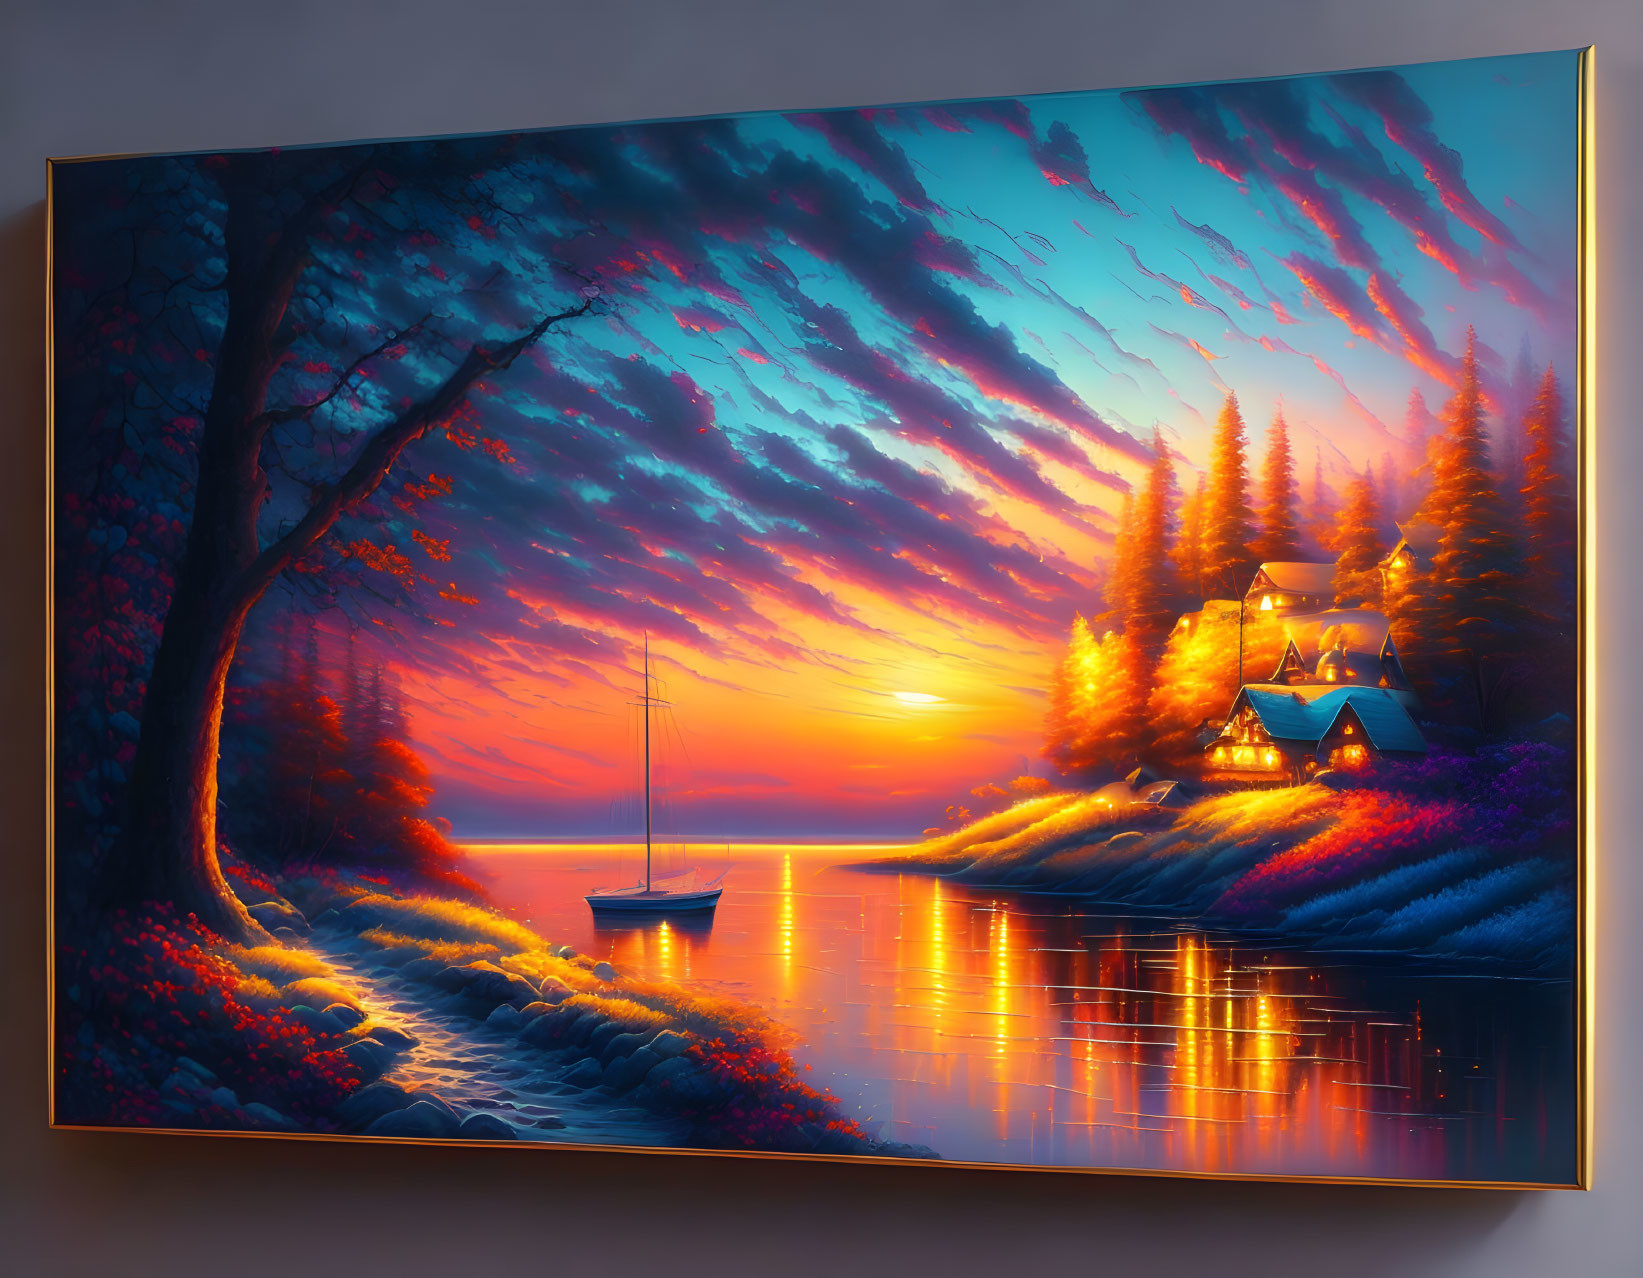 Scenic sunset painting with lake, boat, and autumn trees